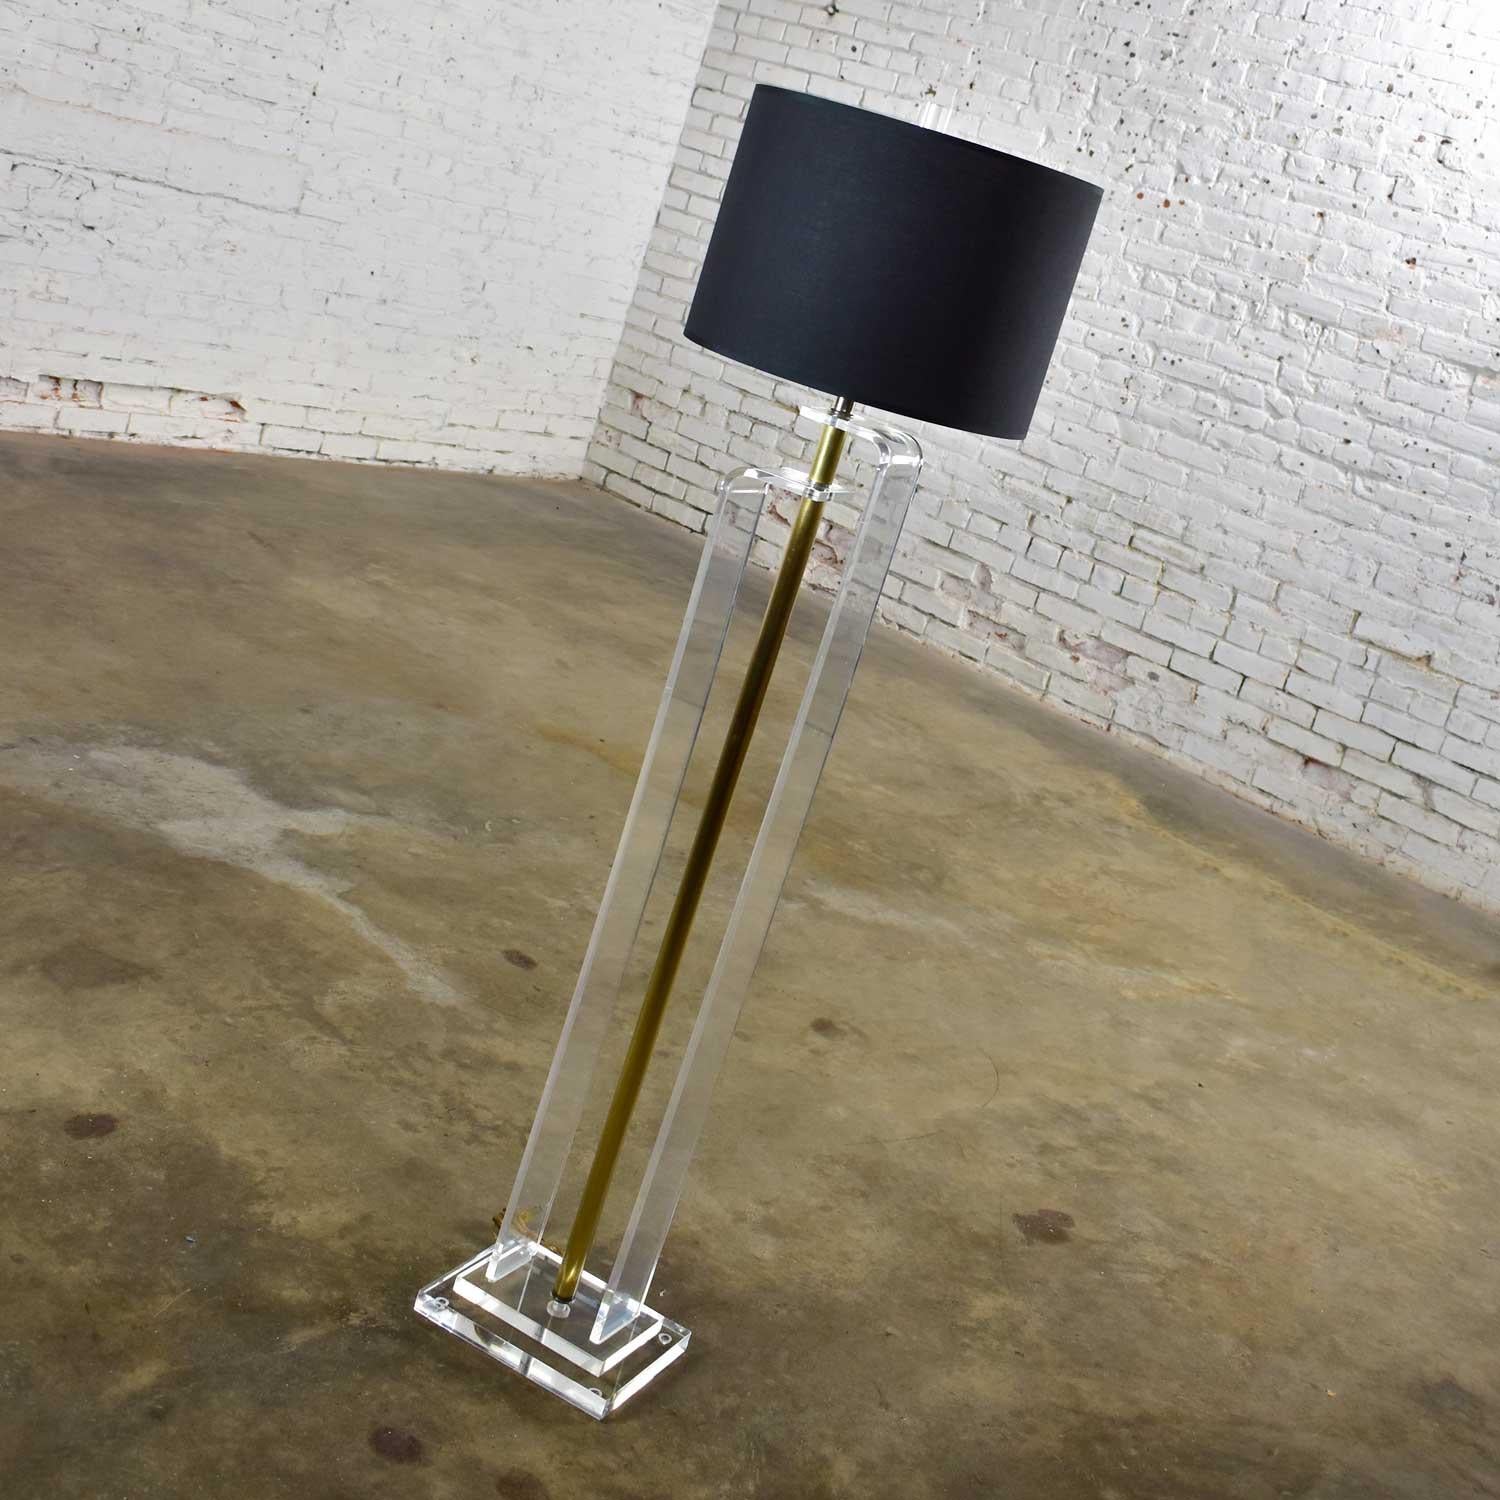 Handsome Art Deco Revival or Hollywood Regency floor lamp comprised of solid Lucite, brass plated shaft, a new black linen-like drum shade, Lucite cylinder shaped finial, and single switch socket. Gorgeous vintage condition. All parts were cleaned,